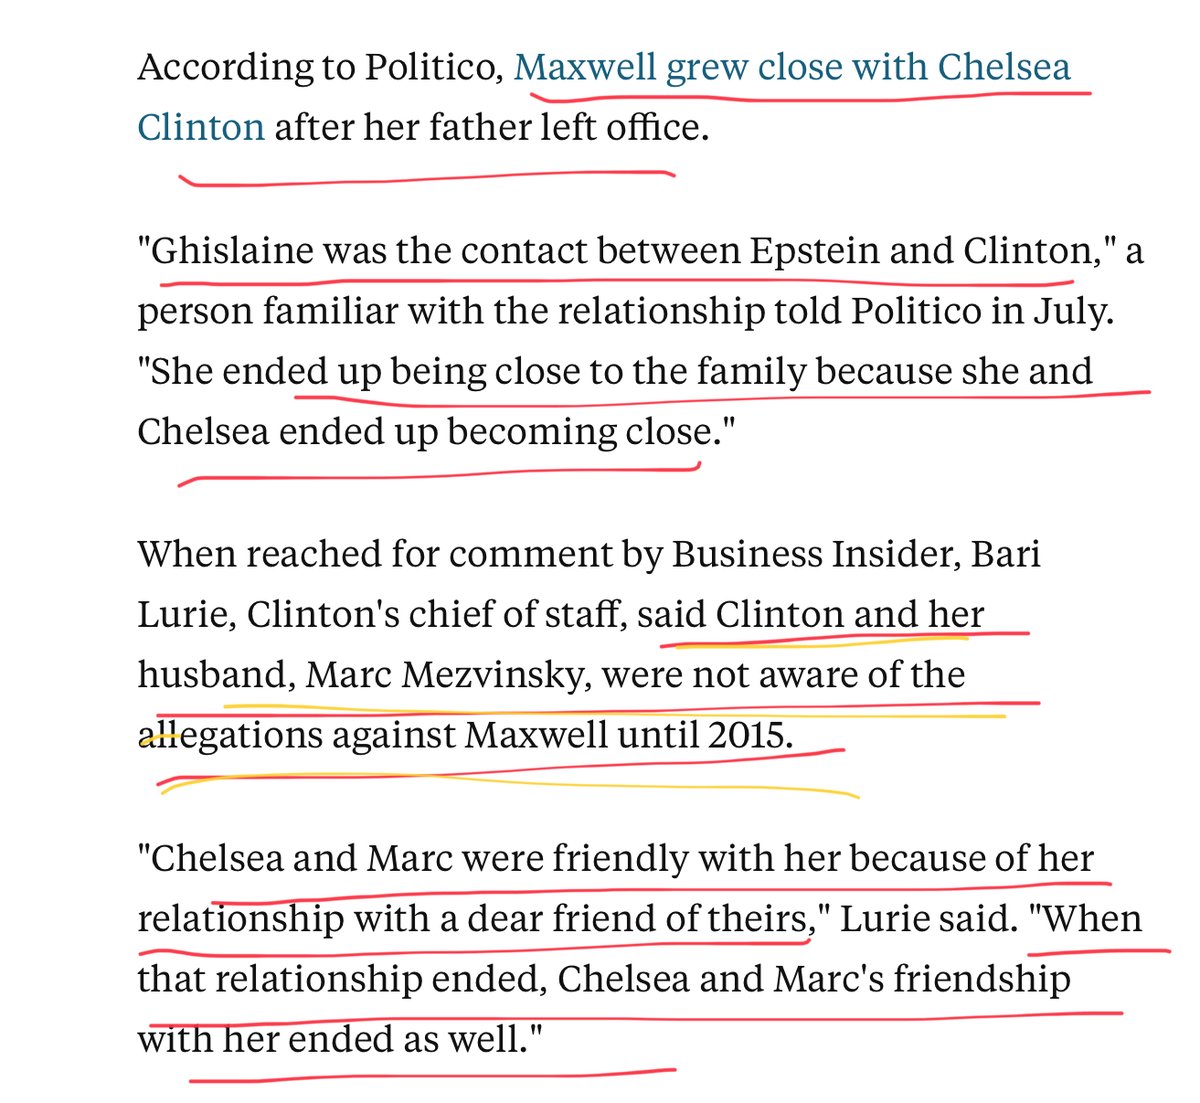 And the Clintons again https://www.businessinsider.com/ghislaine-maxwell-jeffrey-epstein-father-real-estate-assets-foundation-2019-8#maxwell-is-said-to-have-introduced-epstein-to-many-of-her-high-flying-friends-7